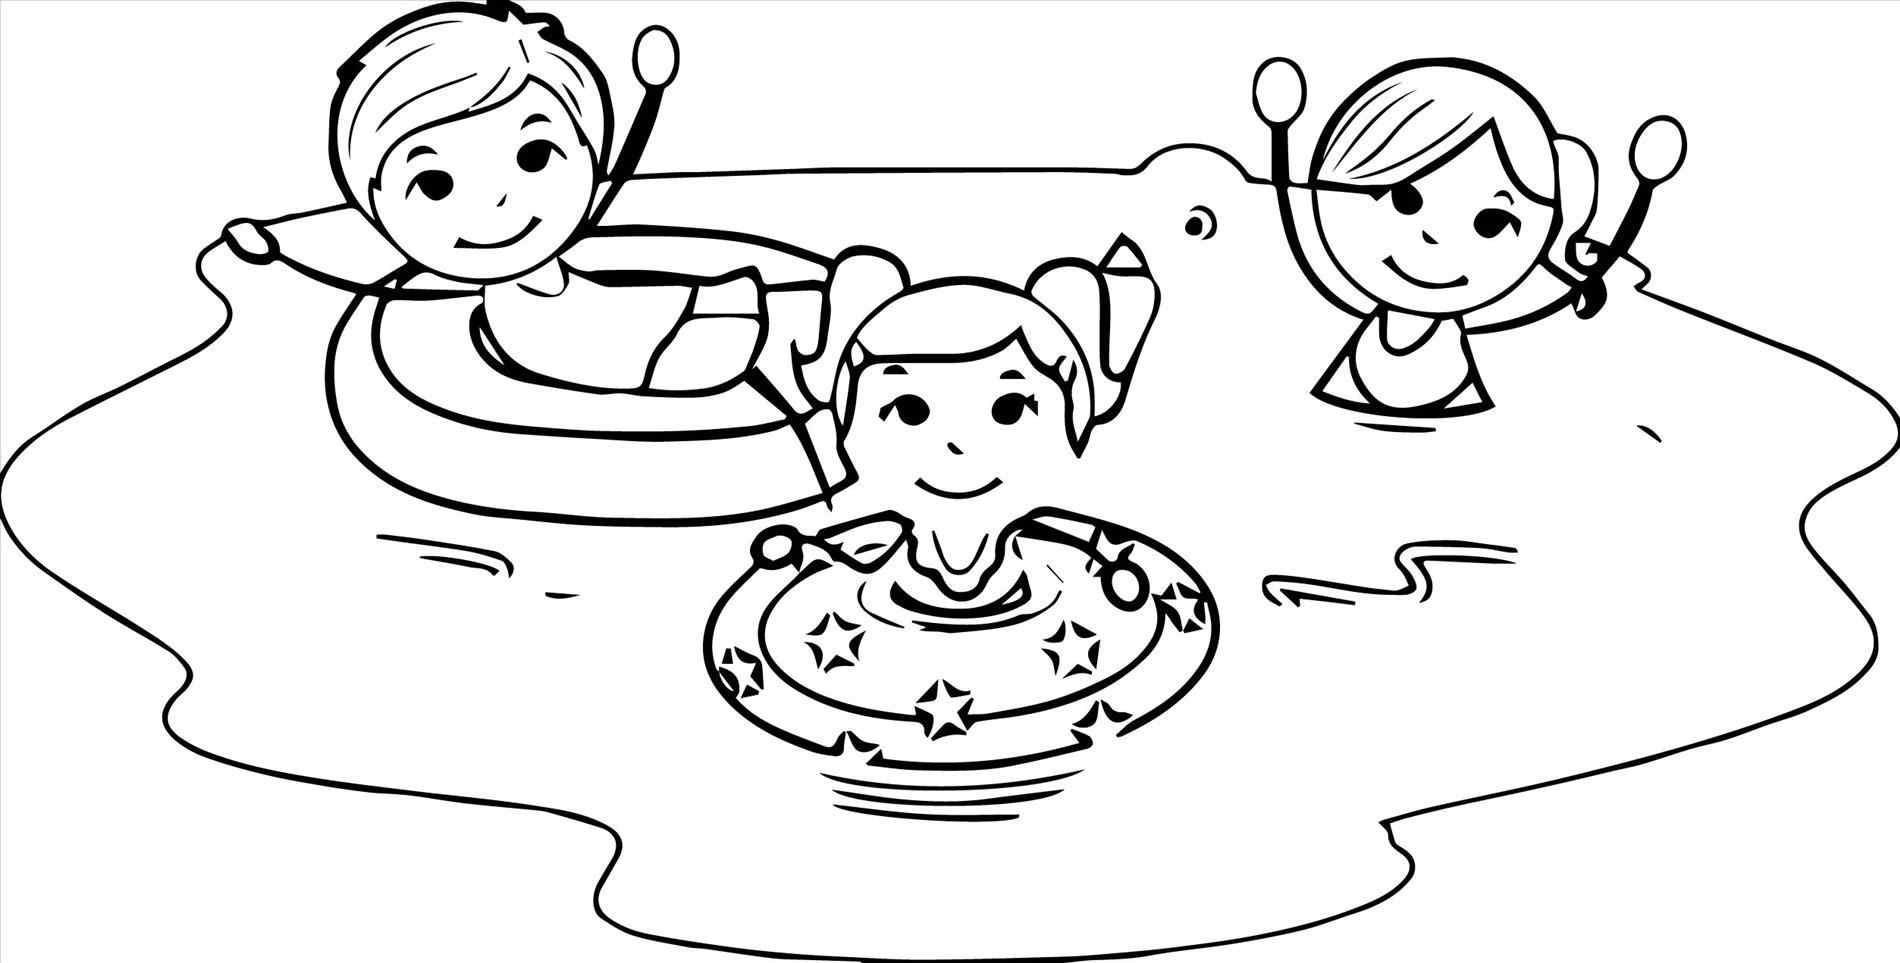 Vacation clipart black and white 3 » Clipart Station.